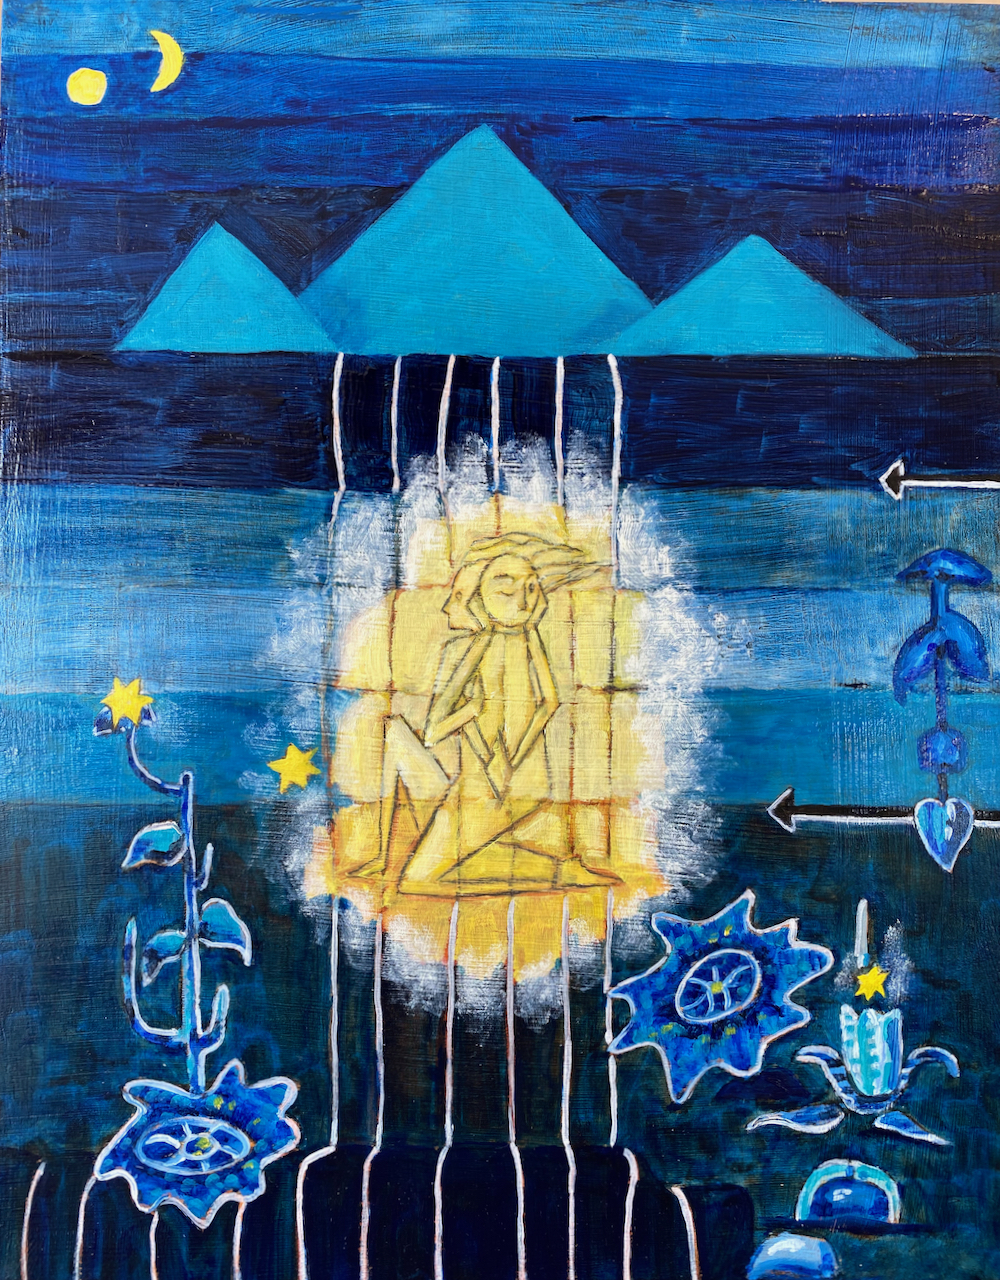 Eve's Waters 9 - by Marilyn Wells with Dream Symbols in blues with yellow details Eve's Waters 9 - by Marilyn Wells with Dream Symbols in blues with yellow details.